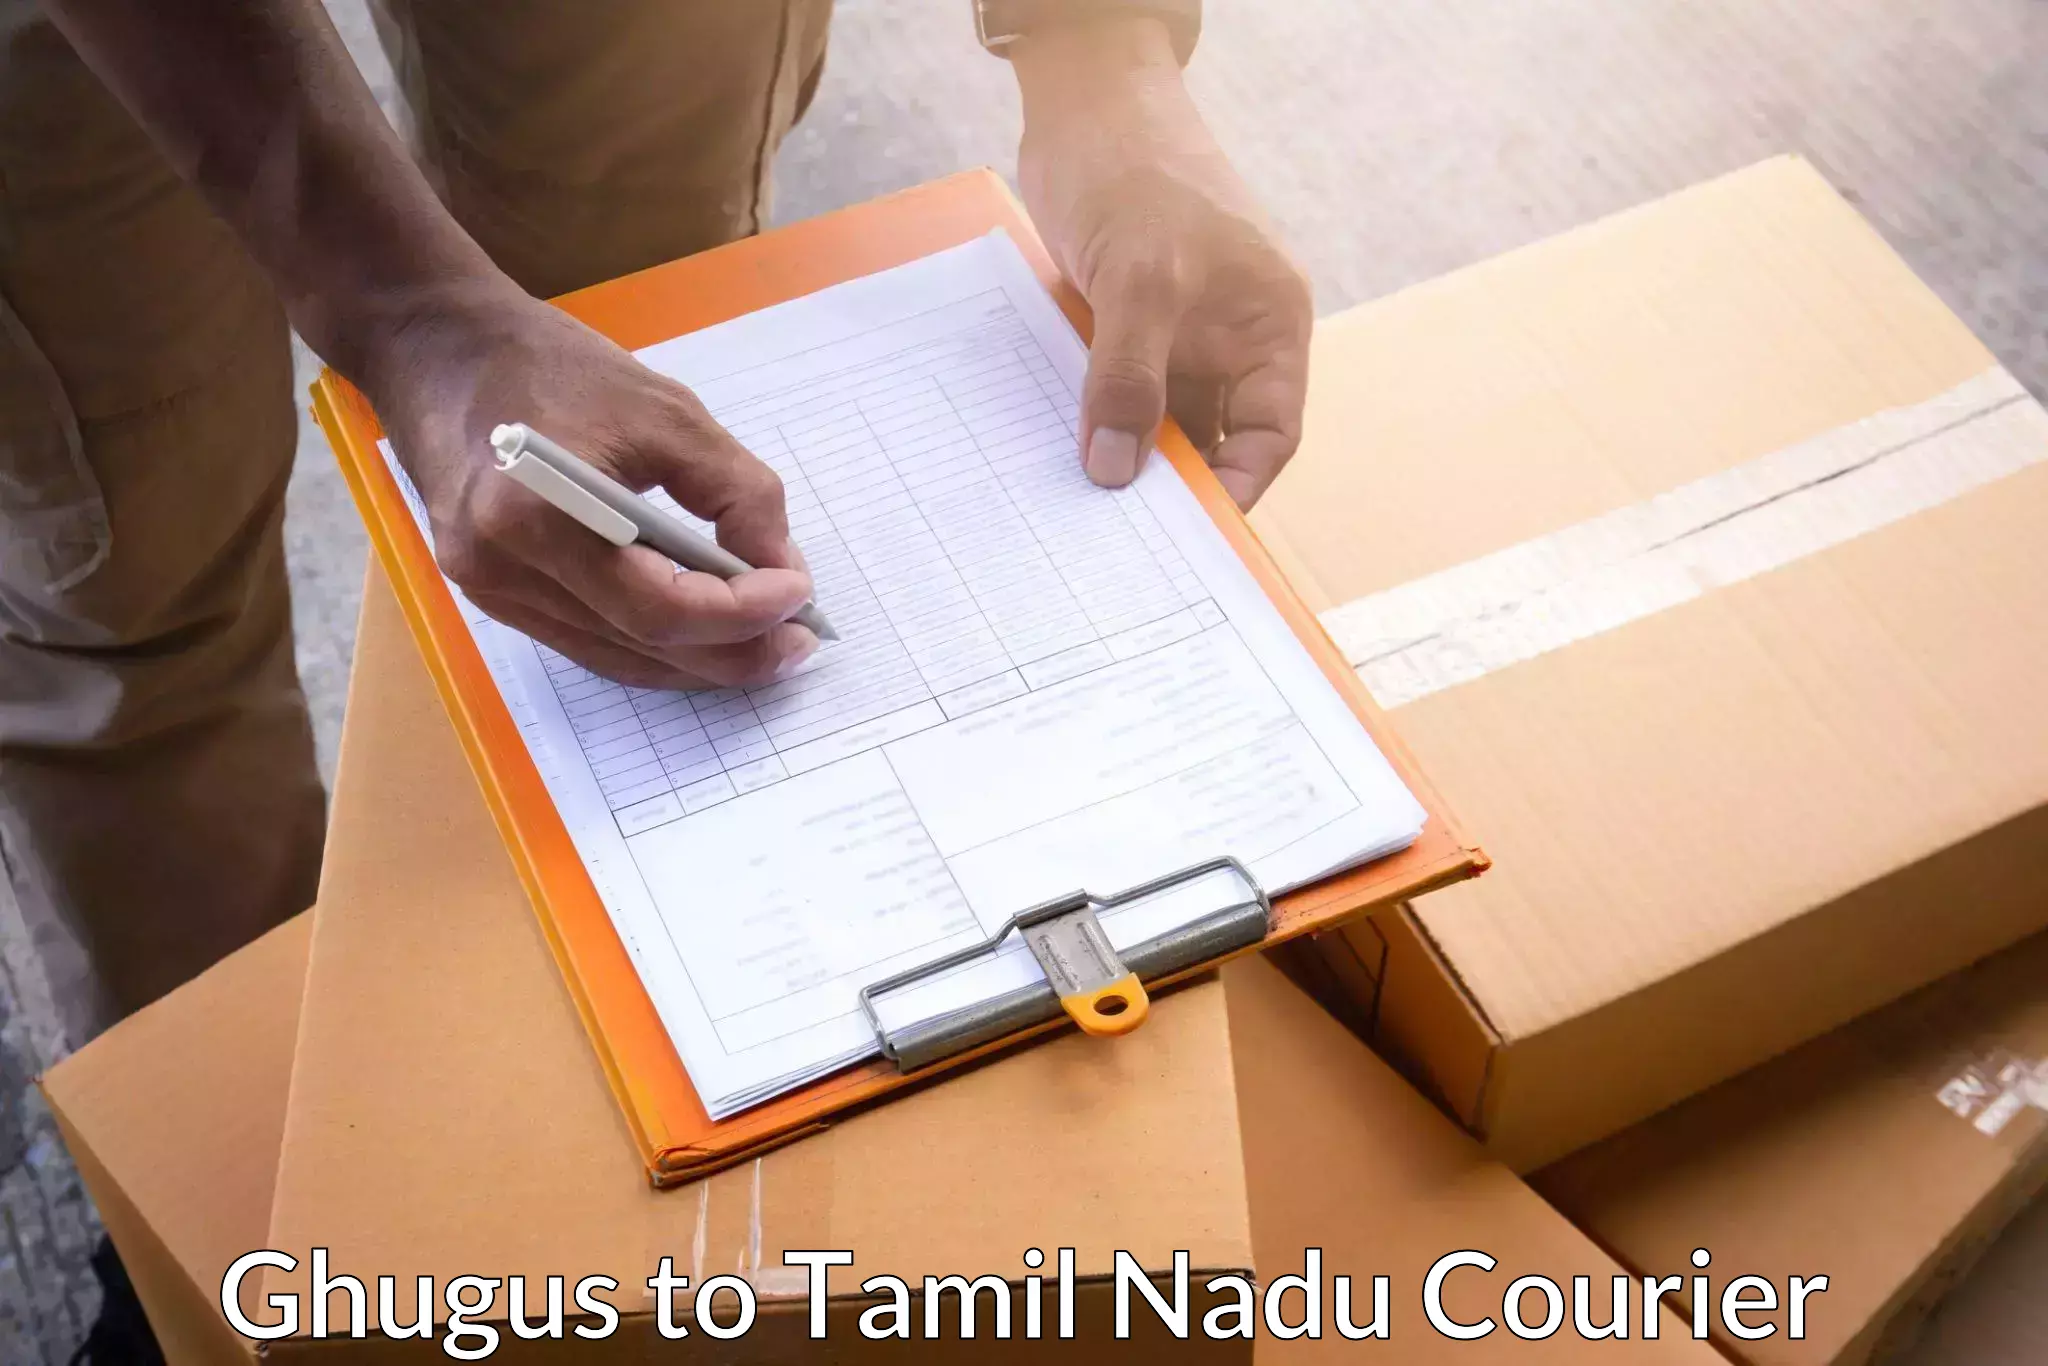 Delivery service partnership Ghugus to Omalur